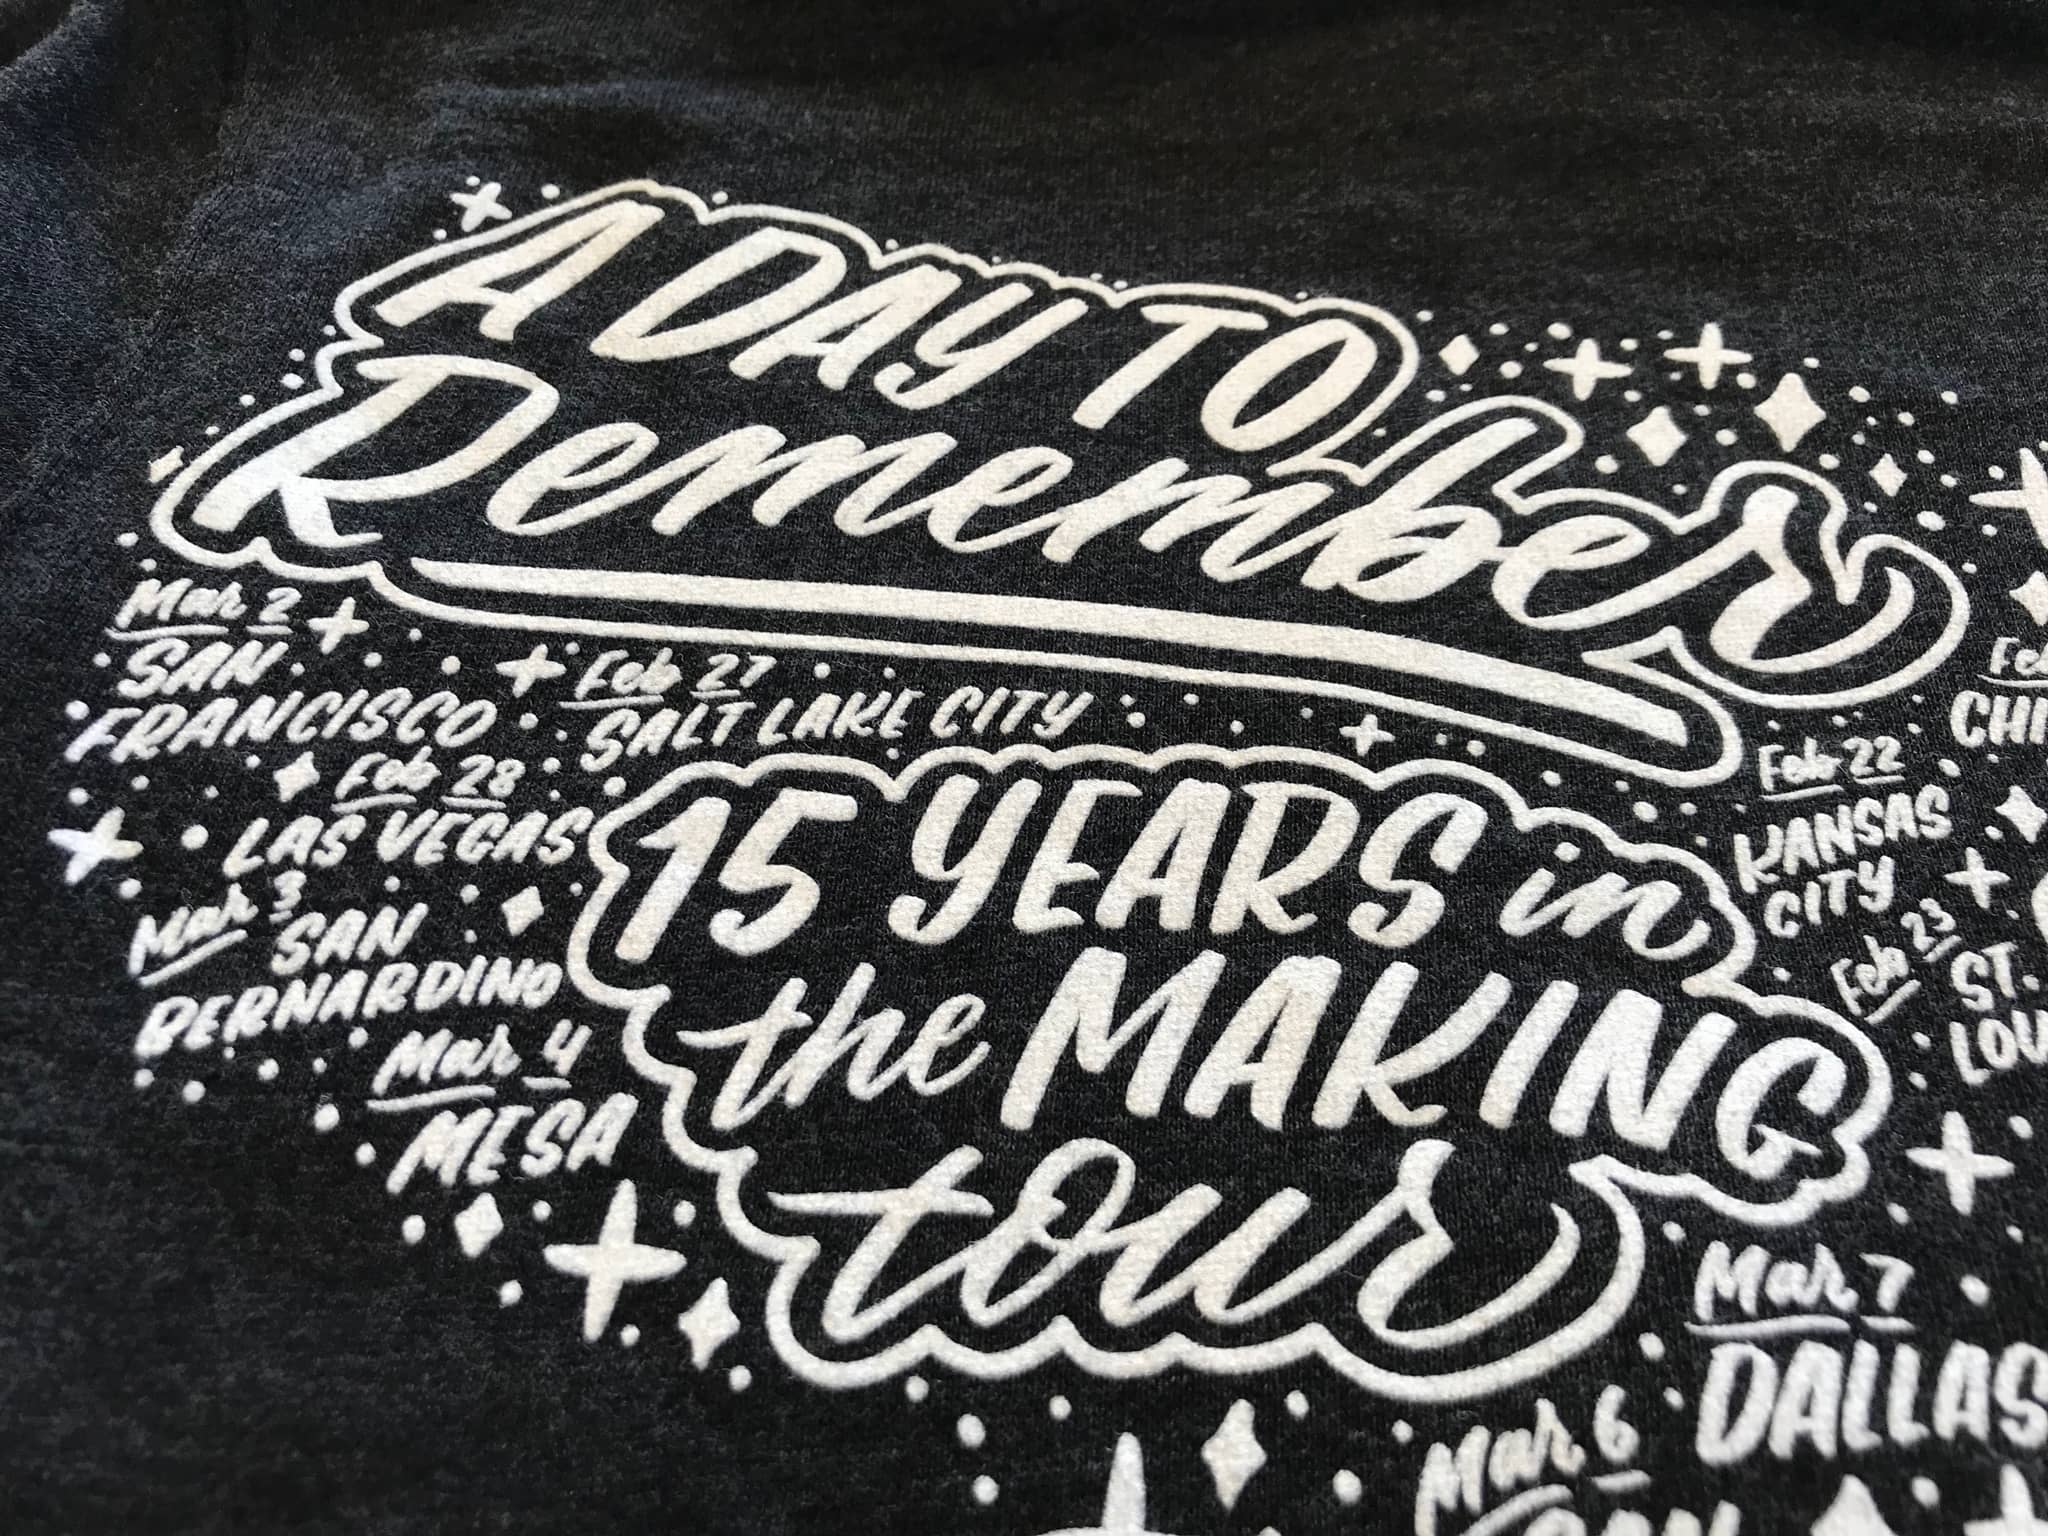 A Day to Remember 15-year tour hoodie hand lettered